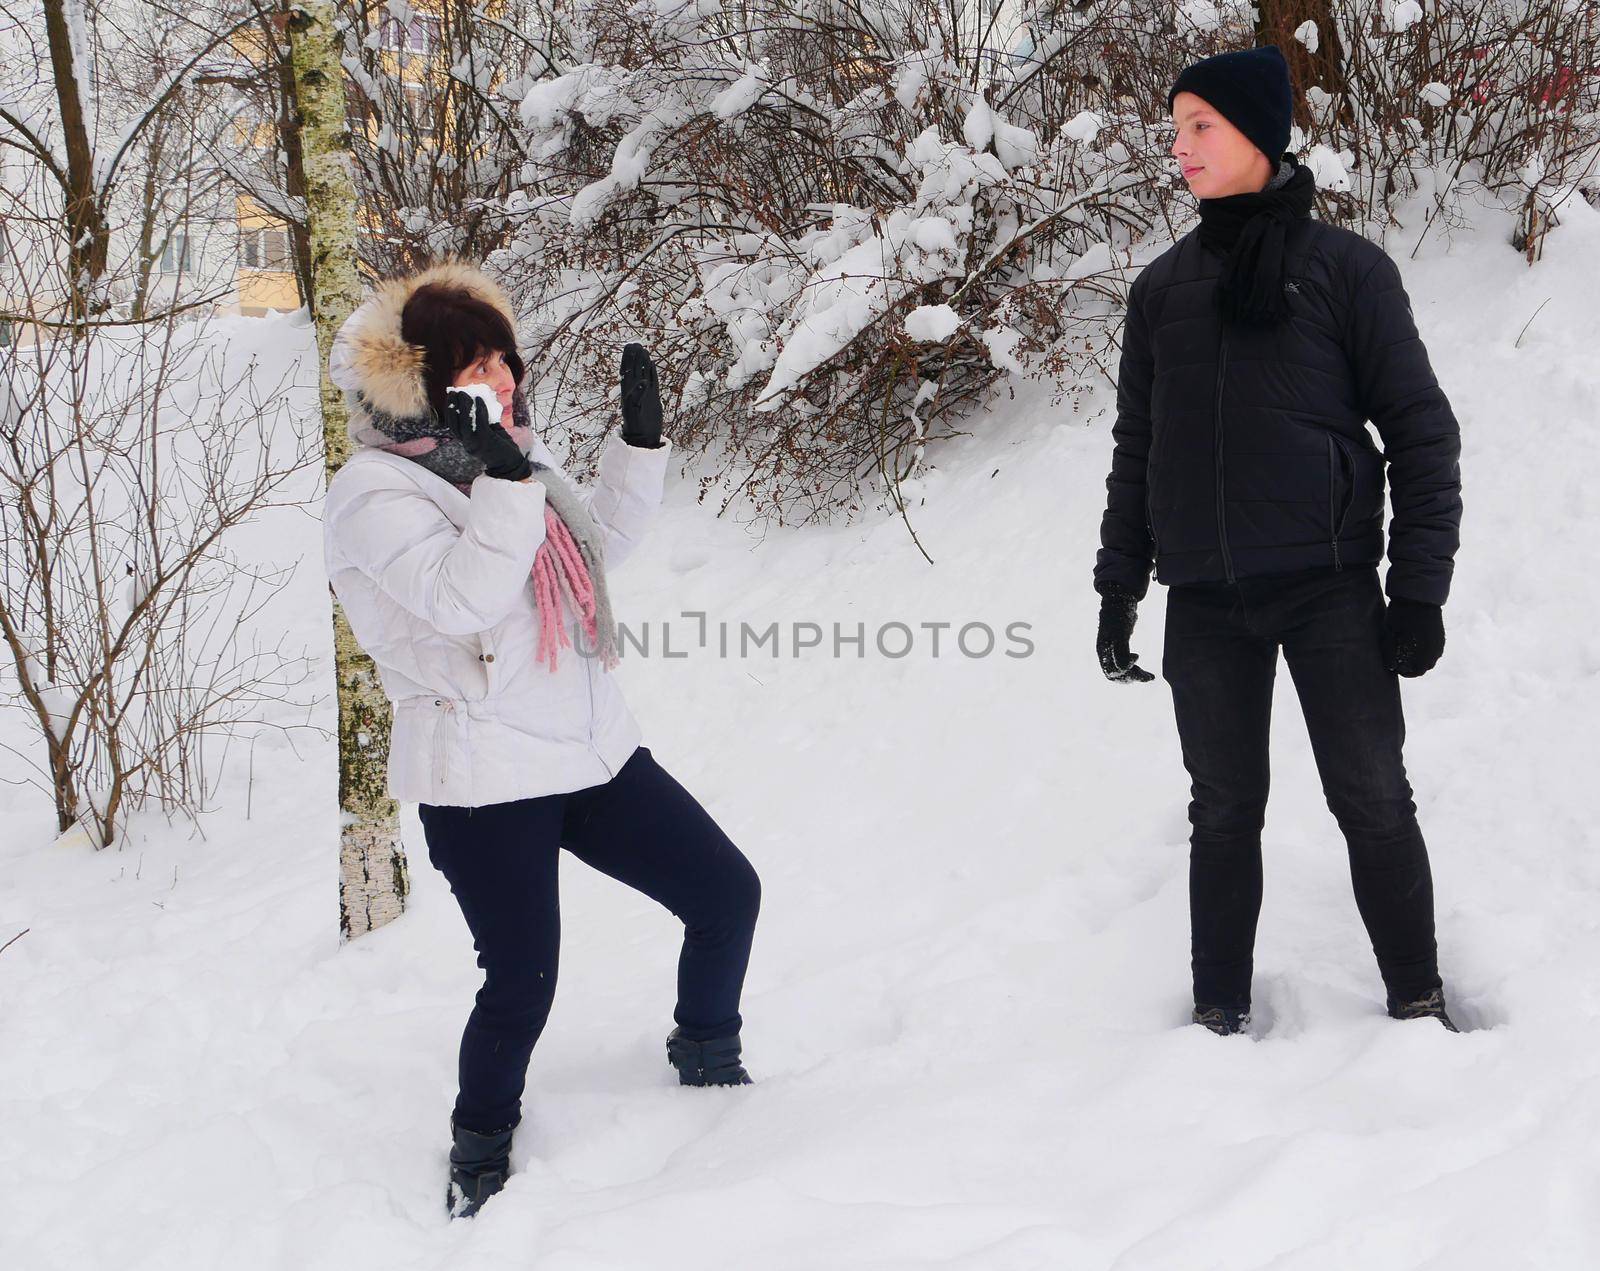 Mom in a white jacket and scarf throws a snowball at her joyful son against the backdrop of snow-covered bushes.